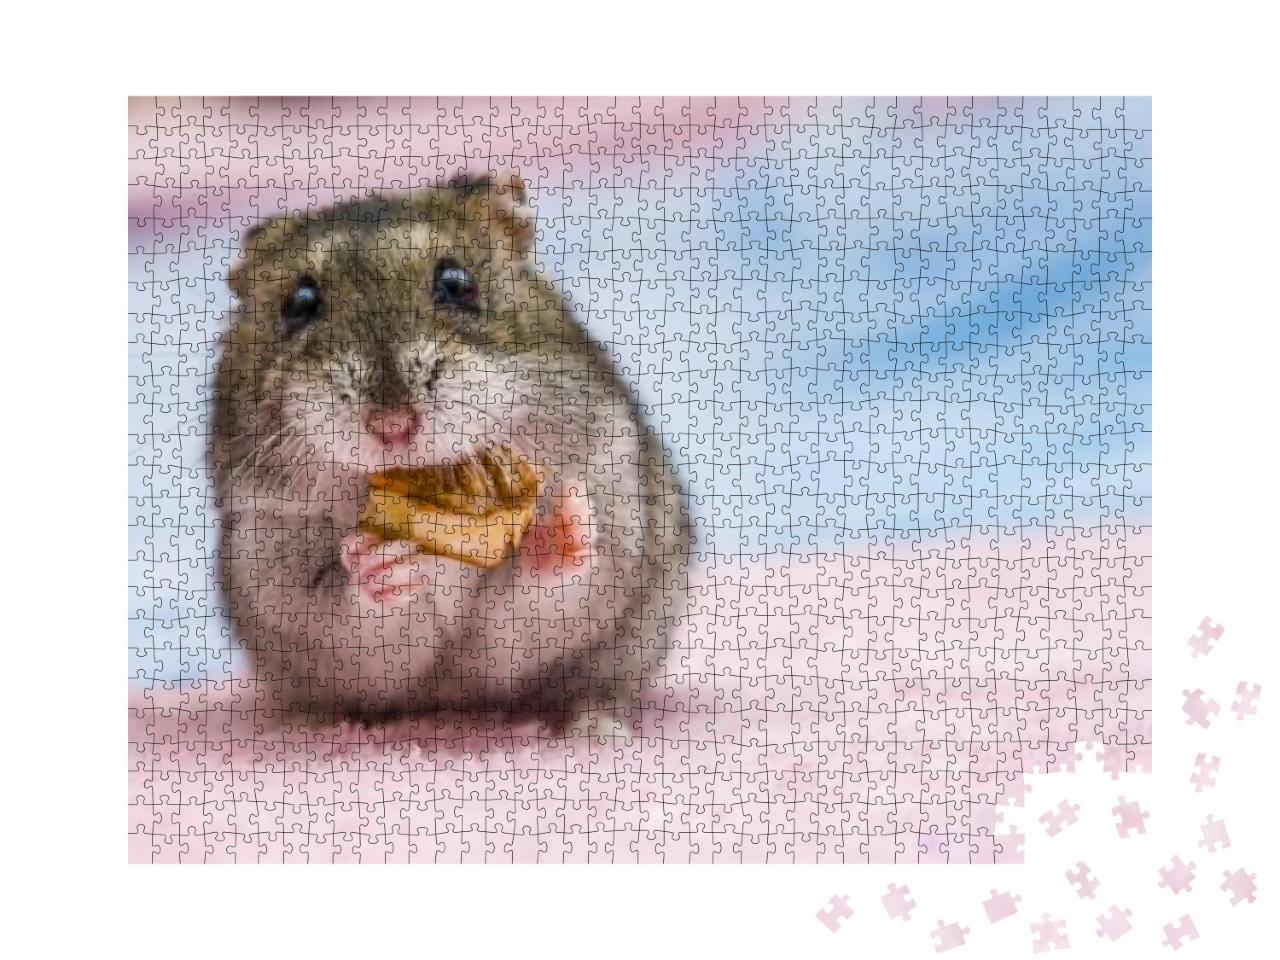 Russian Hamster in Front of White Background Portrait, Ha... Jigsaw Puzzle with 1000 pieces